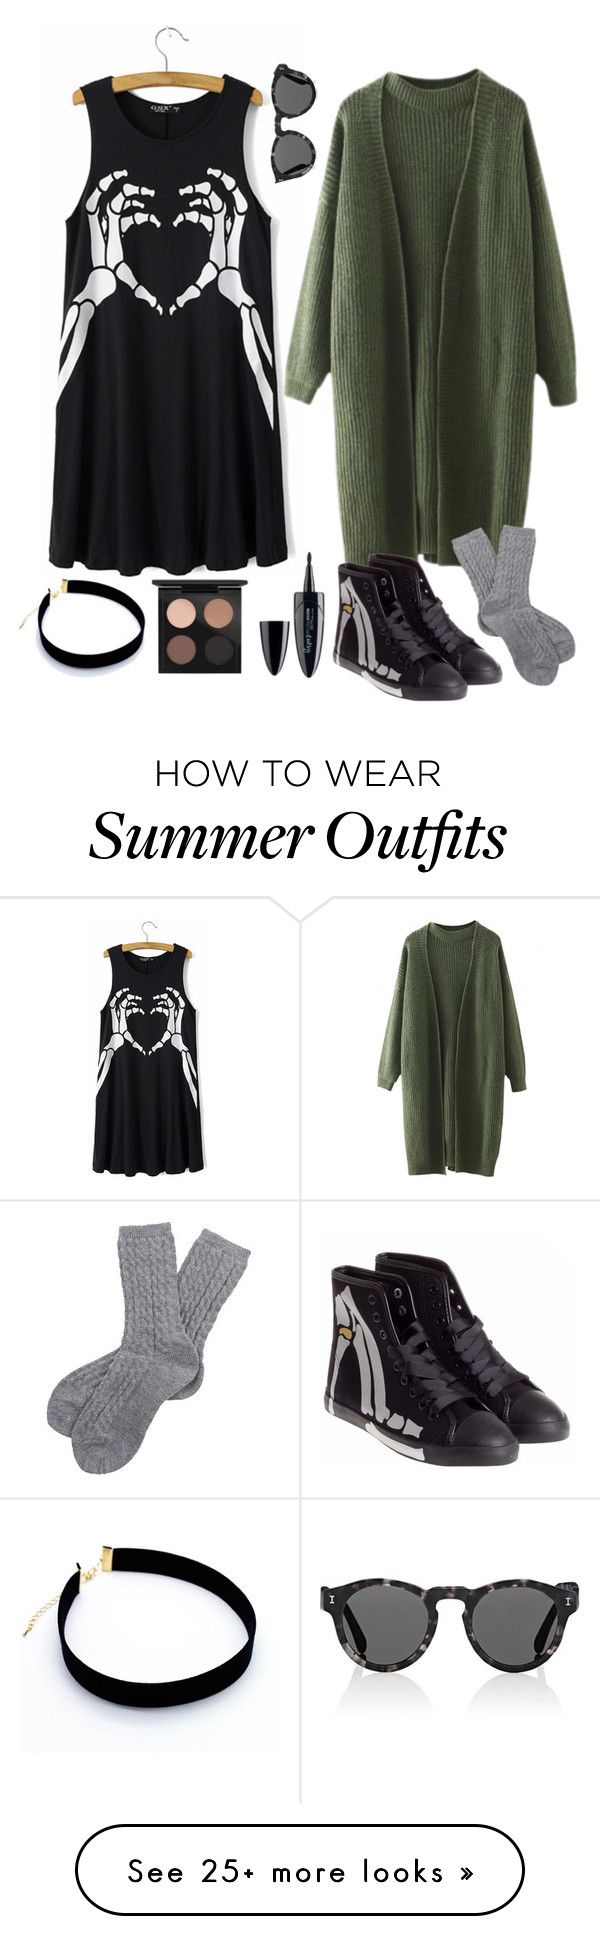 "Outfit 239" by xkhione on Polyvore featuring Be & D, Barbour, MAC...